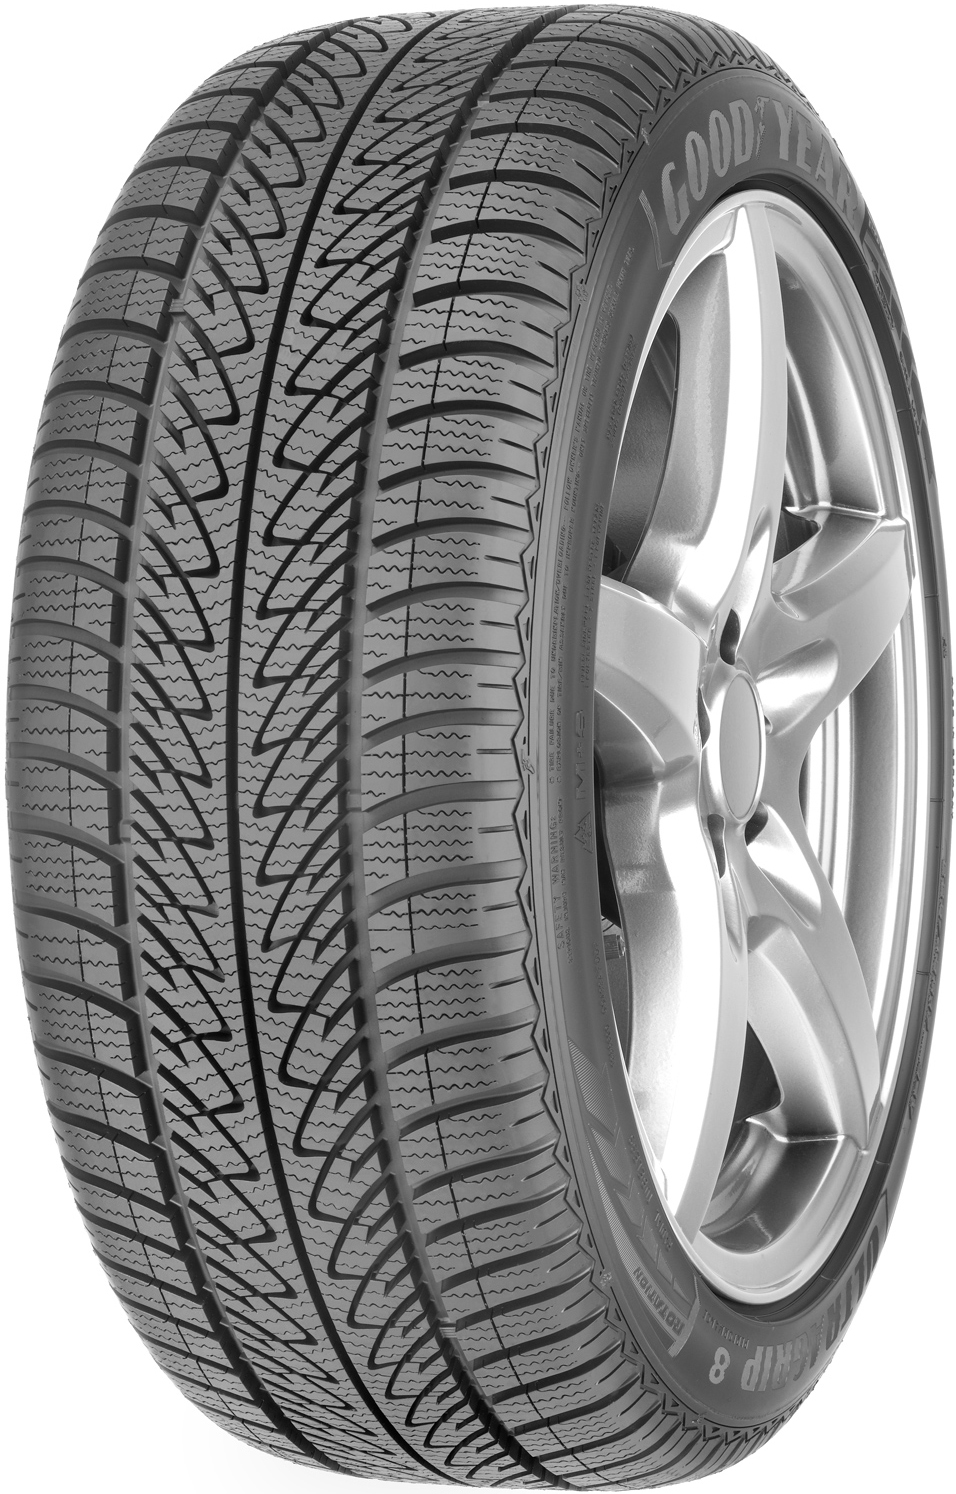 Anvelope auto GOODYEAR ULTRA GRIP 8 PERFOMANCE XL FP 235/45 R17 97